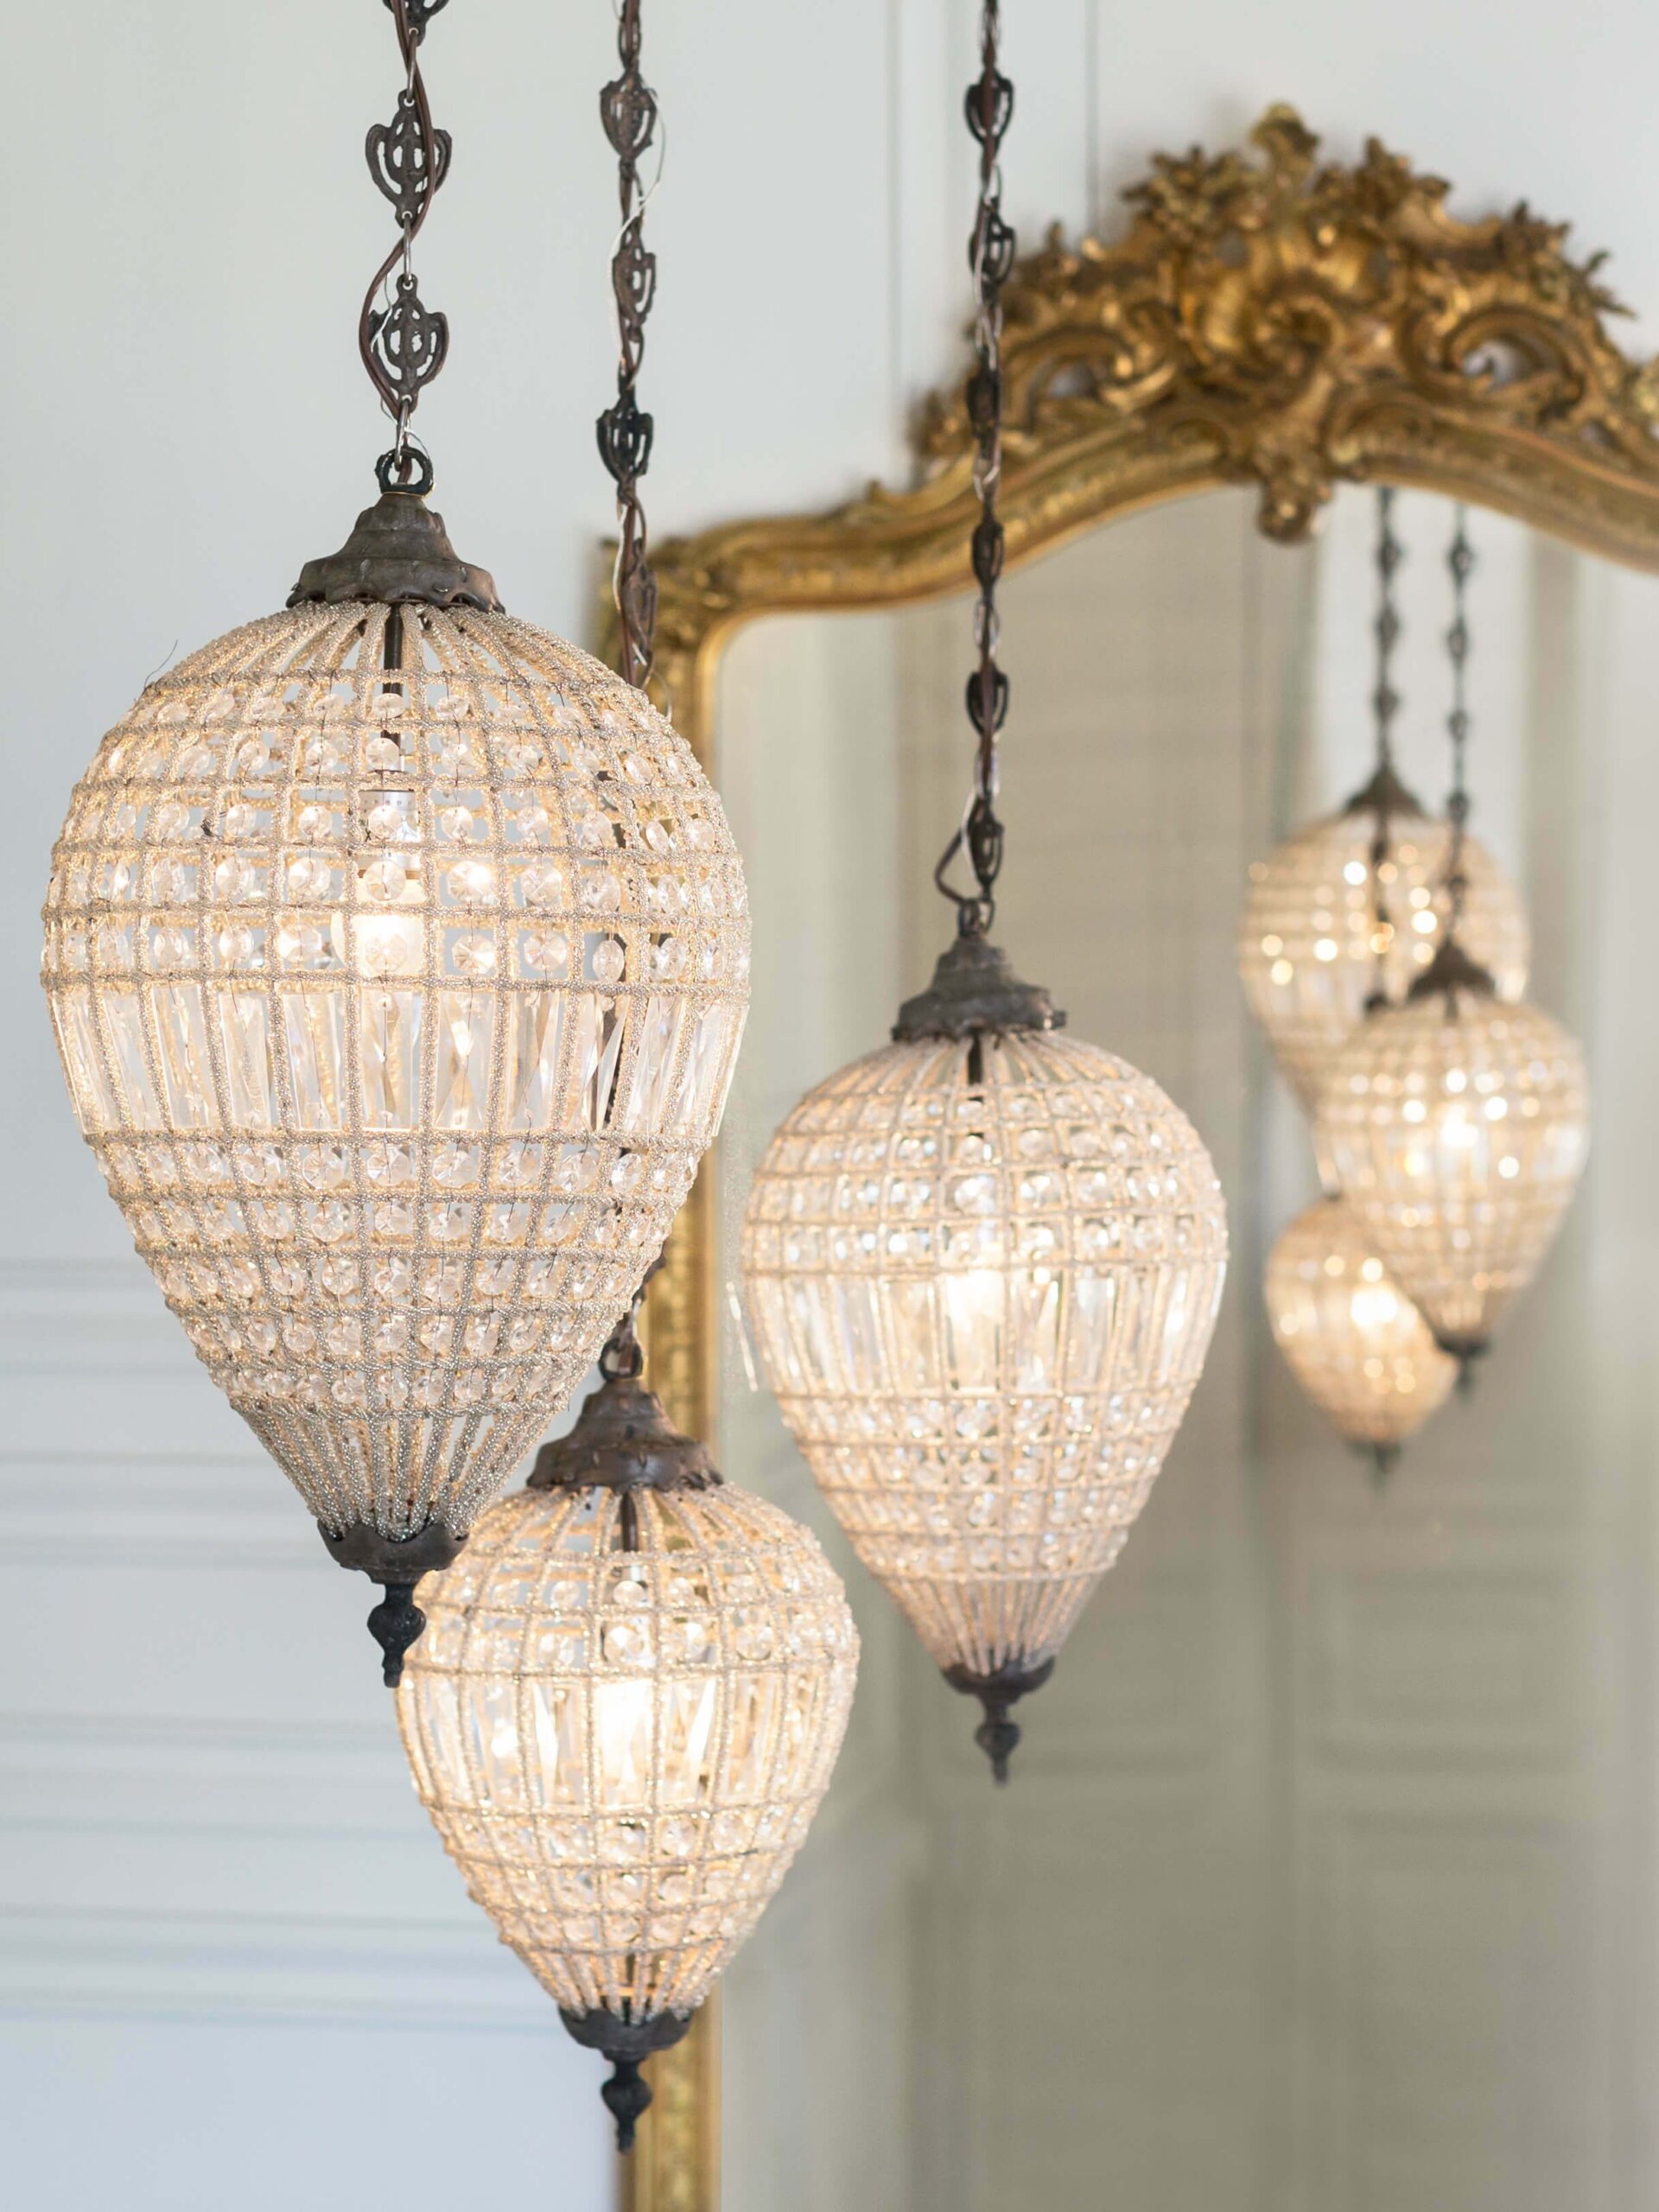 Chandelier Online : Discover The Best Selection Of Chandelier Online With Our Exclusive Collection